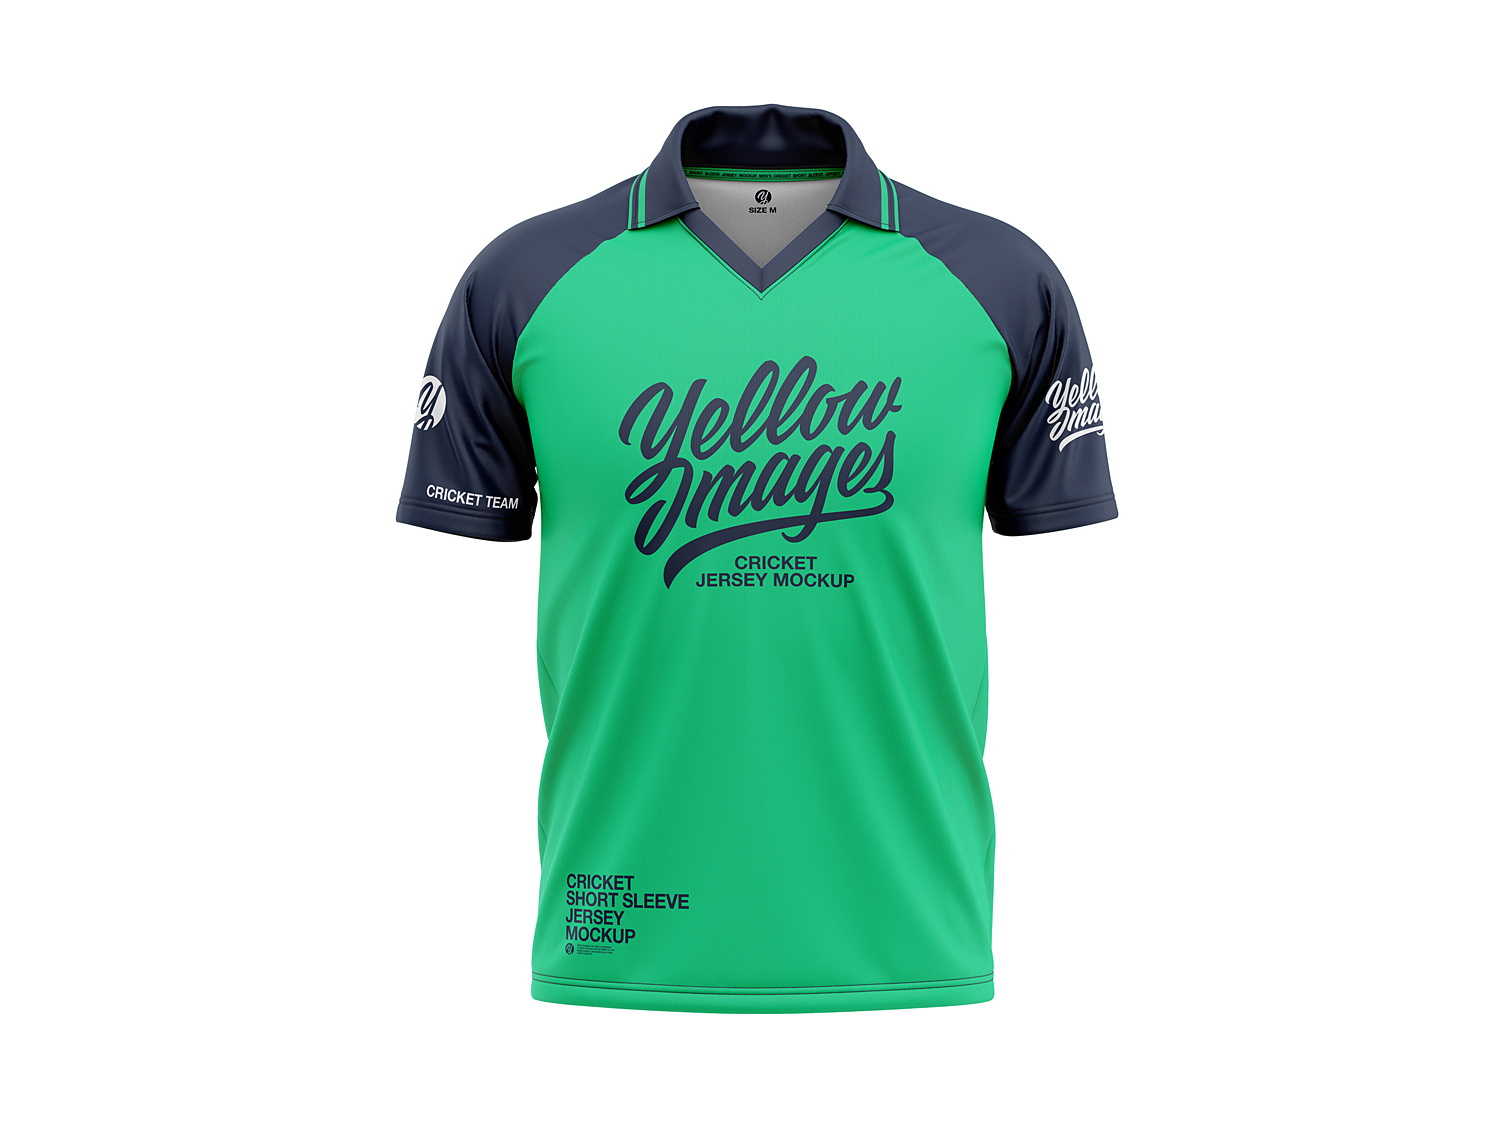 Download Cricket Jersey Mockup by CG Tailor on Dribbble